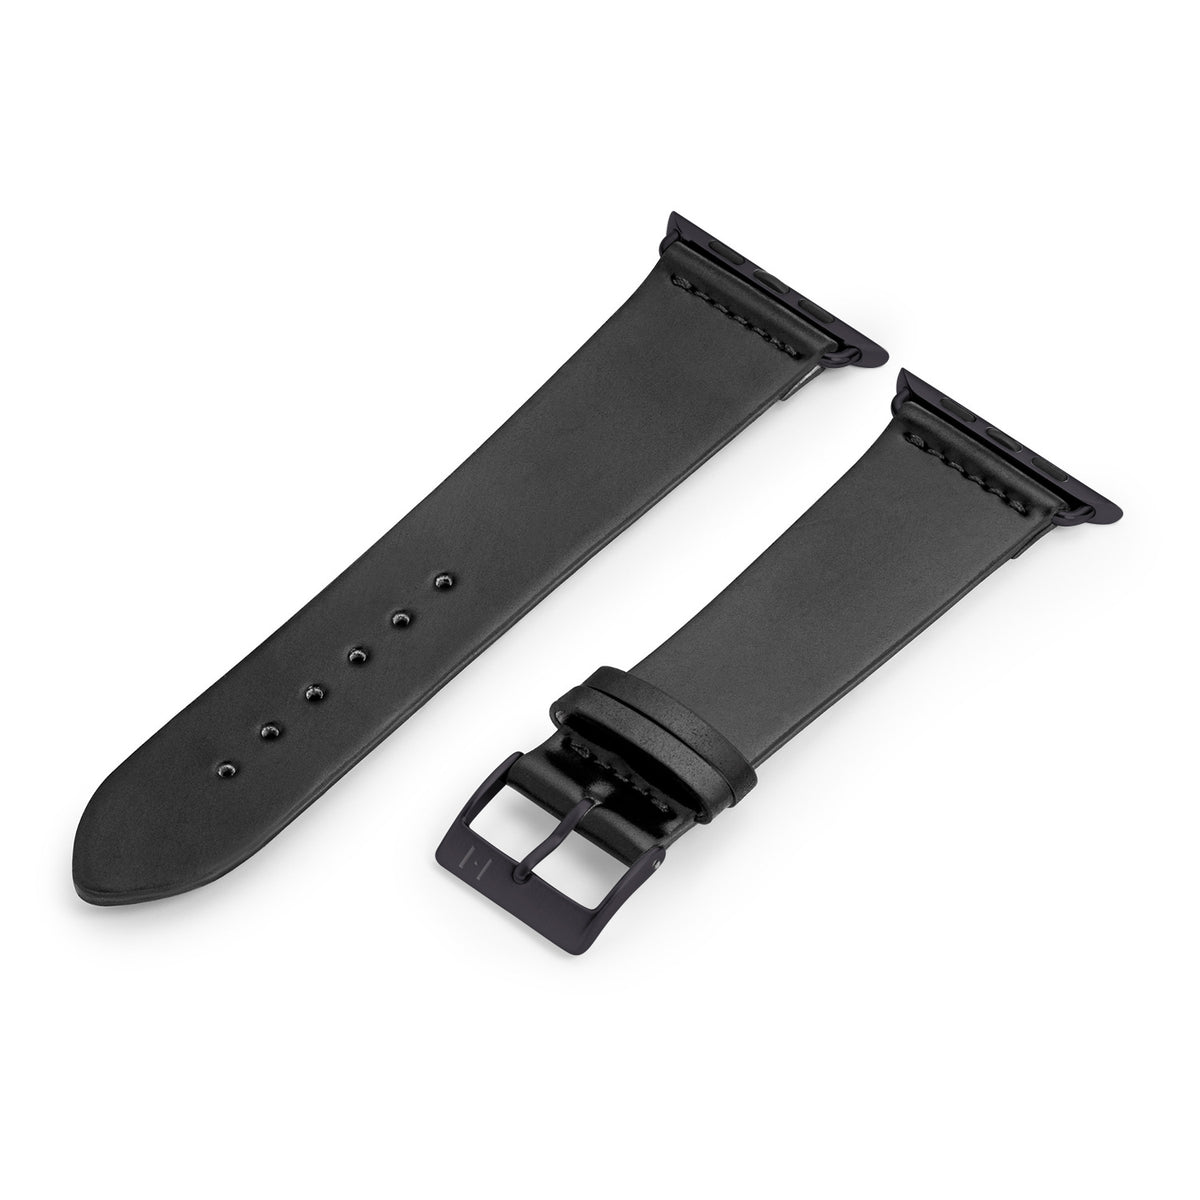 Apple Watch leather strap made of Shell Cordovan &quot;EPPENDORF&quot; - black